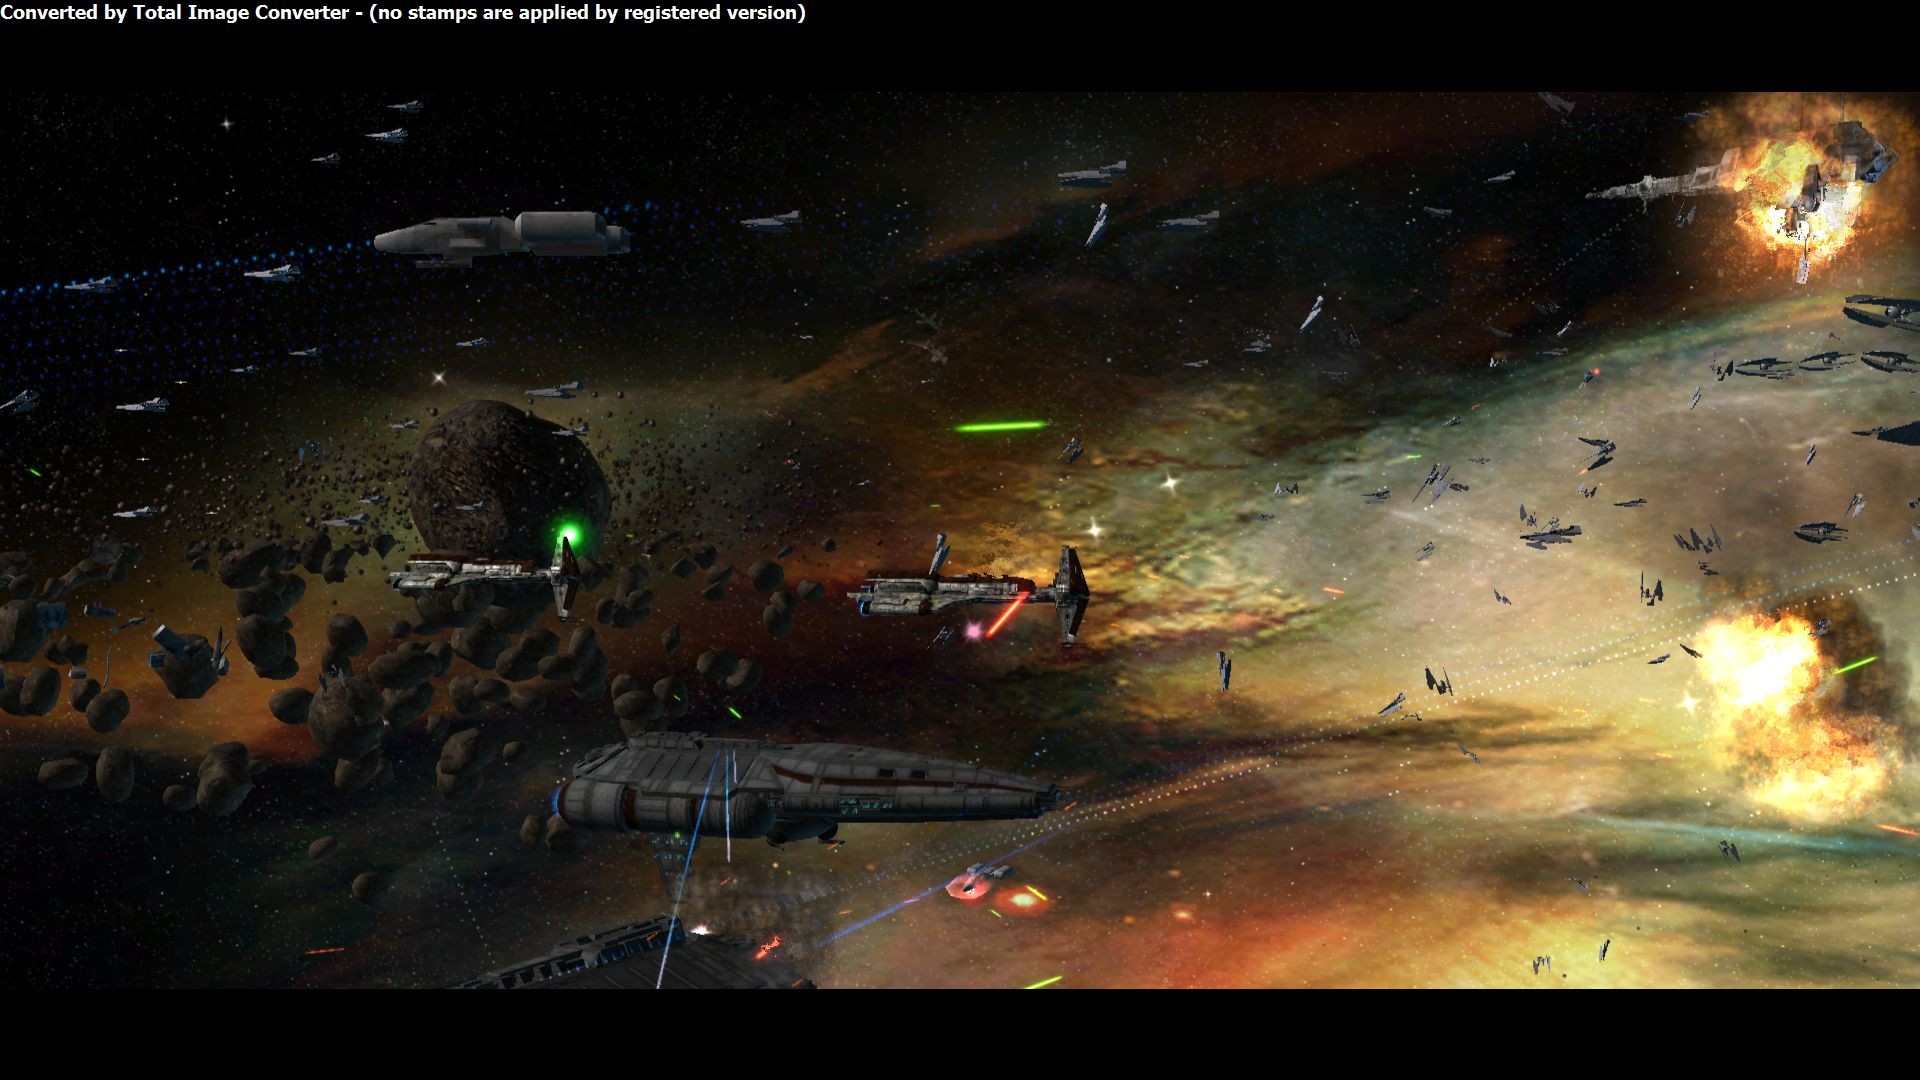 The Most Epic Battle Image - Epic Star Wars Old Republic - HD Wallpaper 